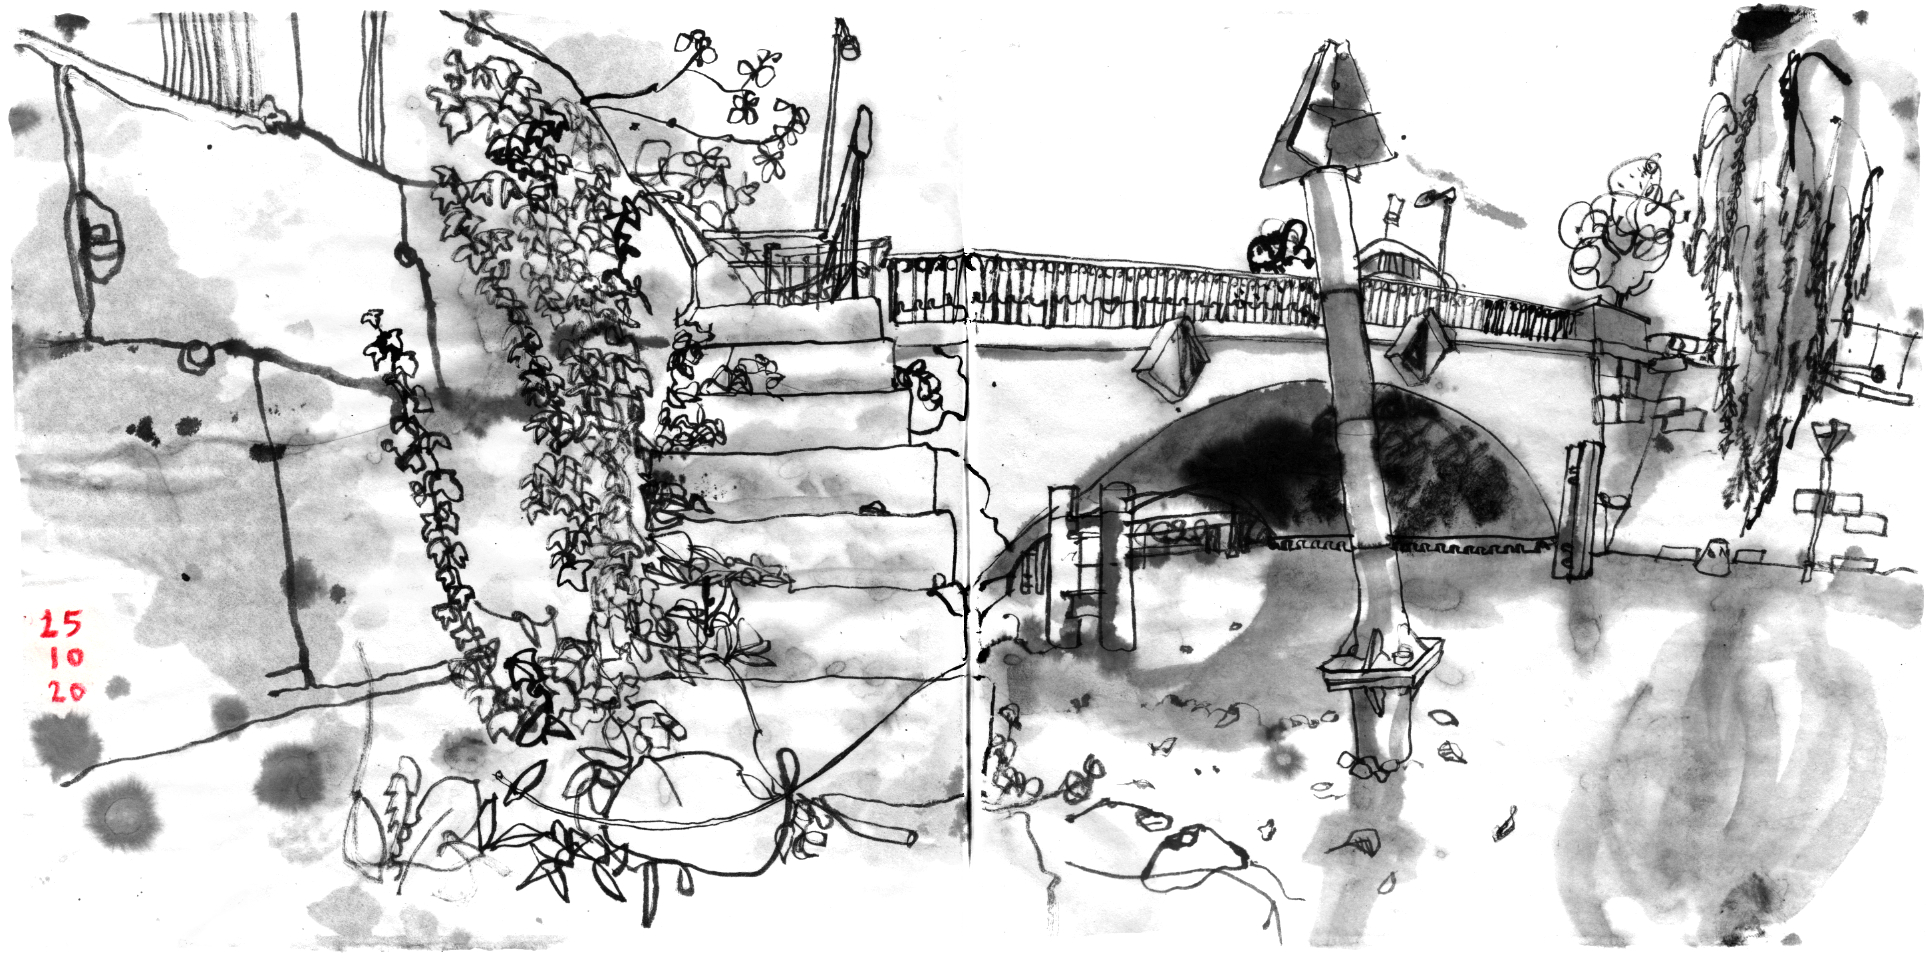 Ink drawing done from a canal, closed to the water level. On the left stairs lead to street level, in the back right is a bowed bridge, a willow on the right, a pole with some nautic sign on top in front.